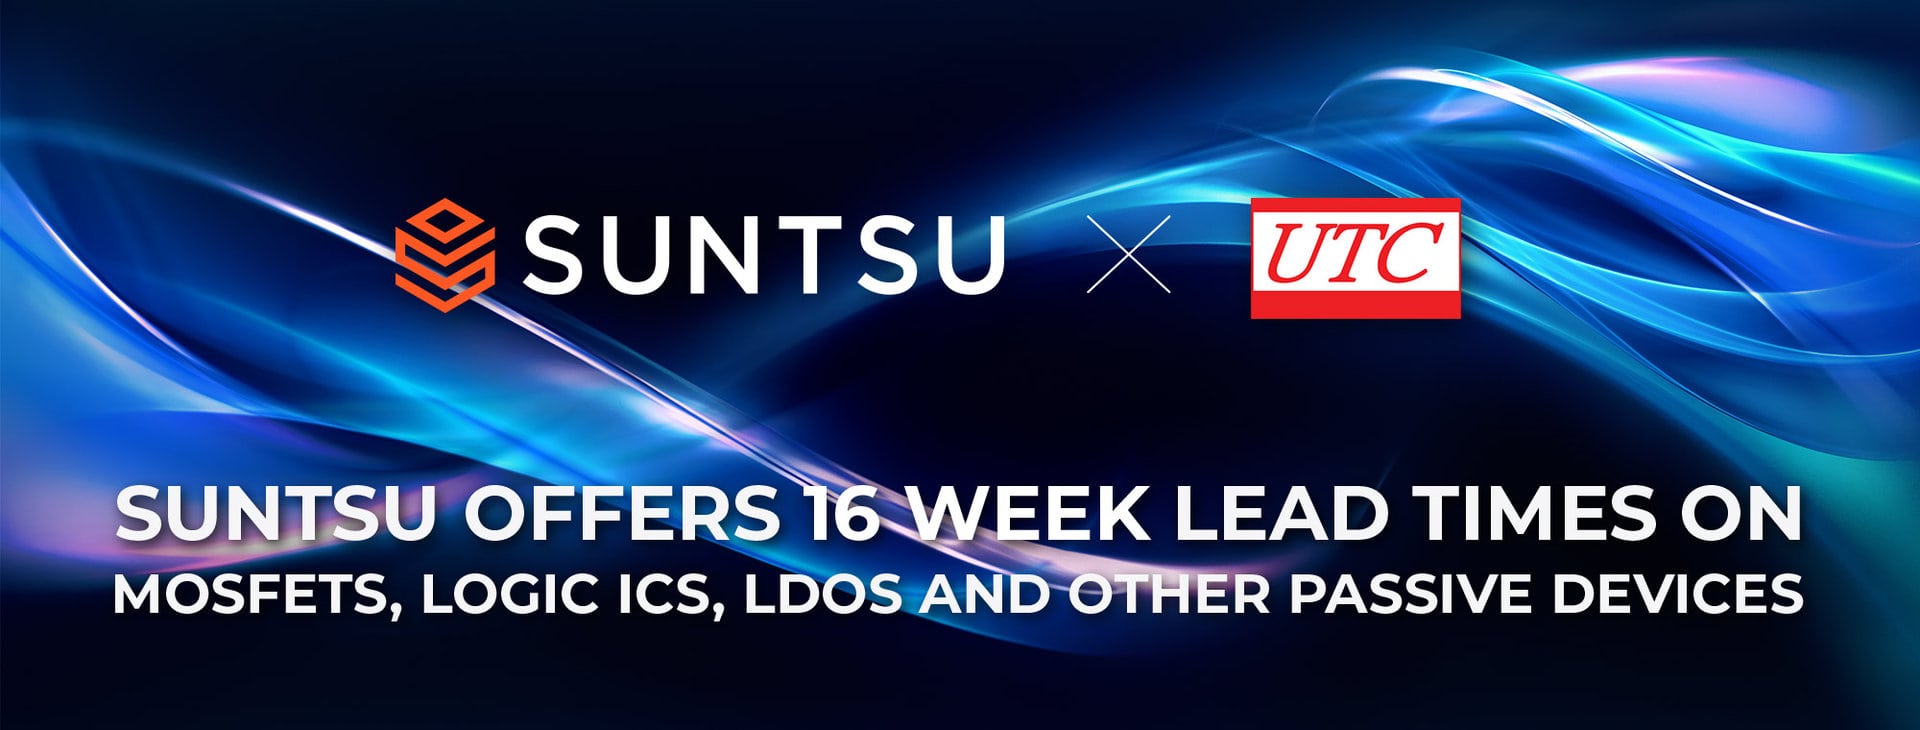 Suntsu Offers 16 Week Lead Times on MOSFETs, Logic ICs, LDOs and other Passive Devices